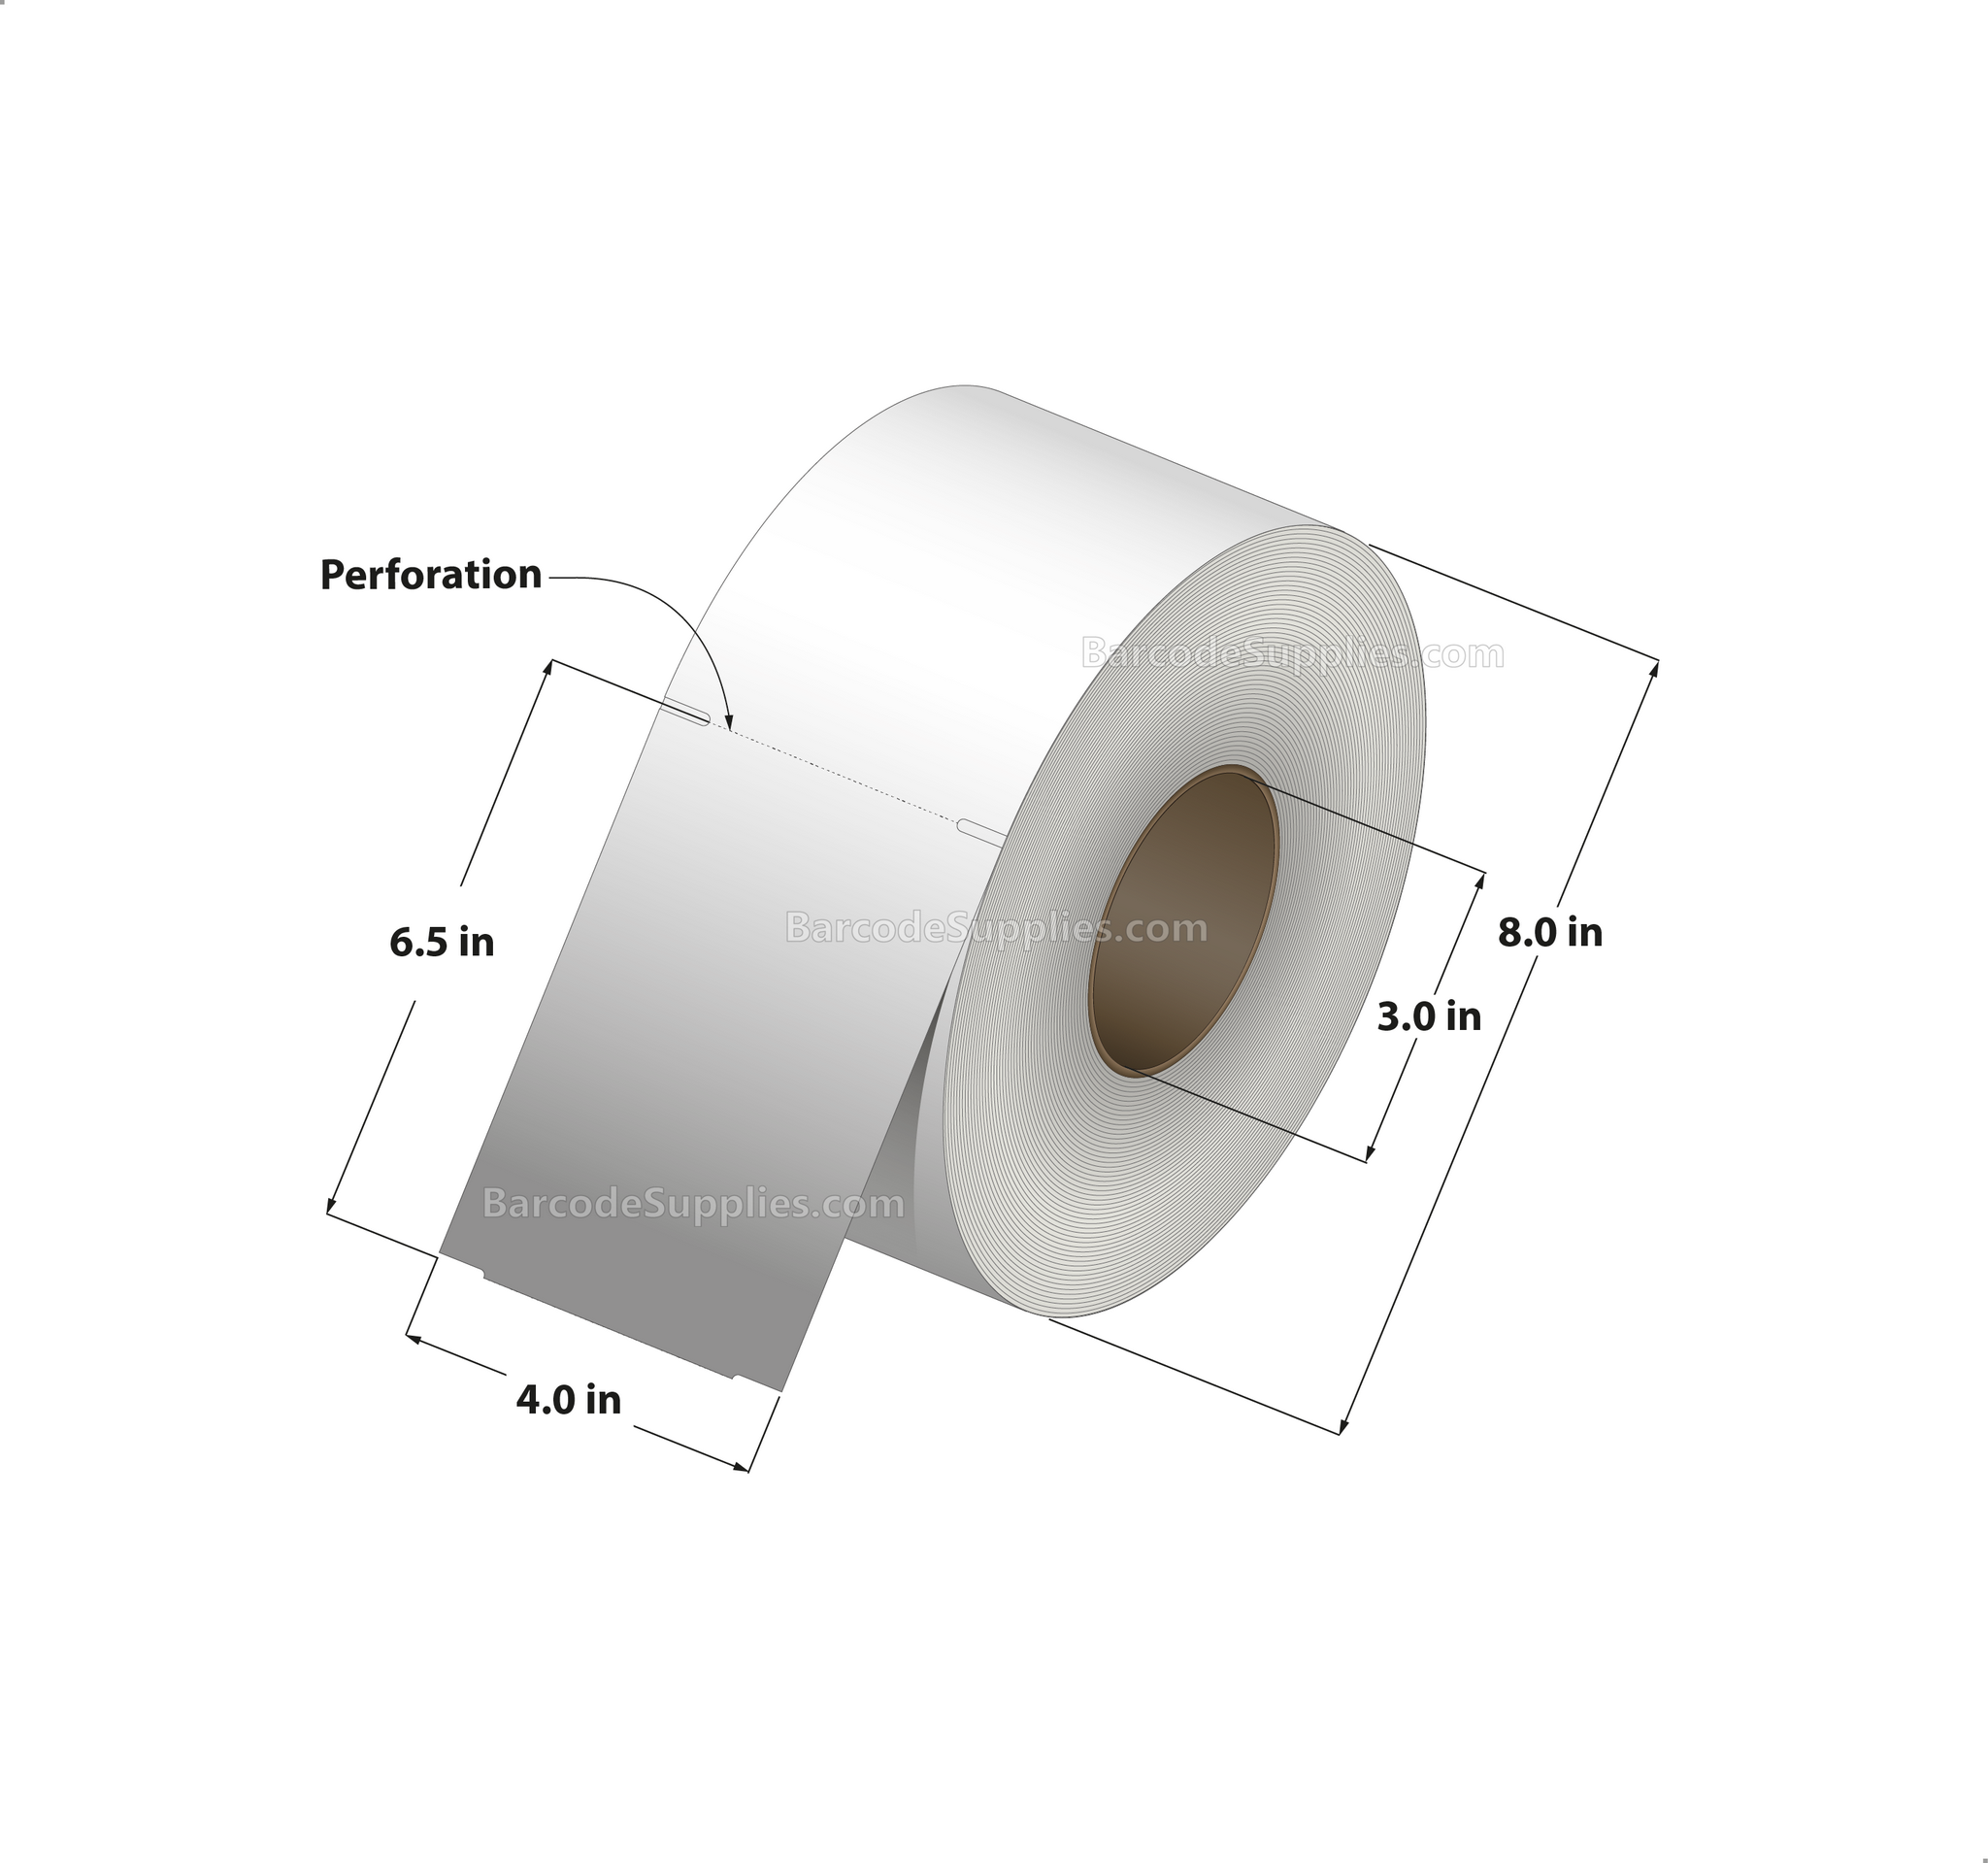 4 x 6.5 Thermal Transfer White Tags With No Adhesive - Perforated - 900 Tags Per Roll - Carton Of 4 Rolls - 3600 Tags Total - MPN: TAG465-1P